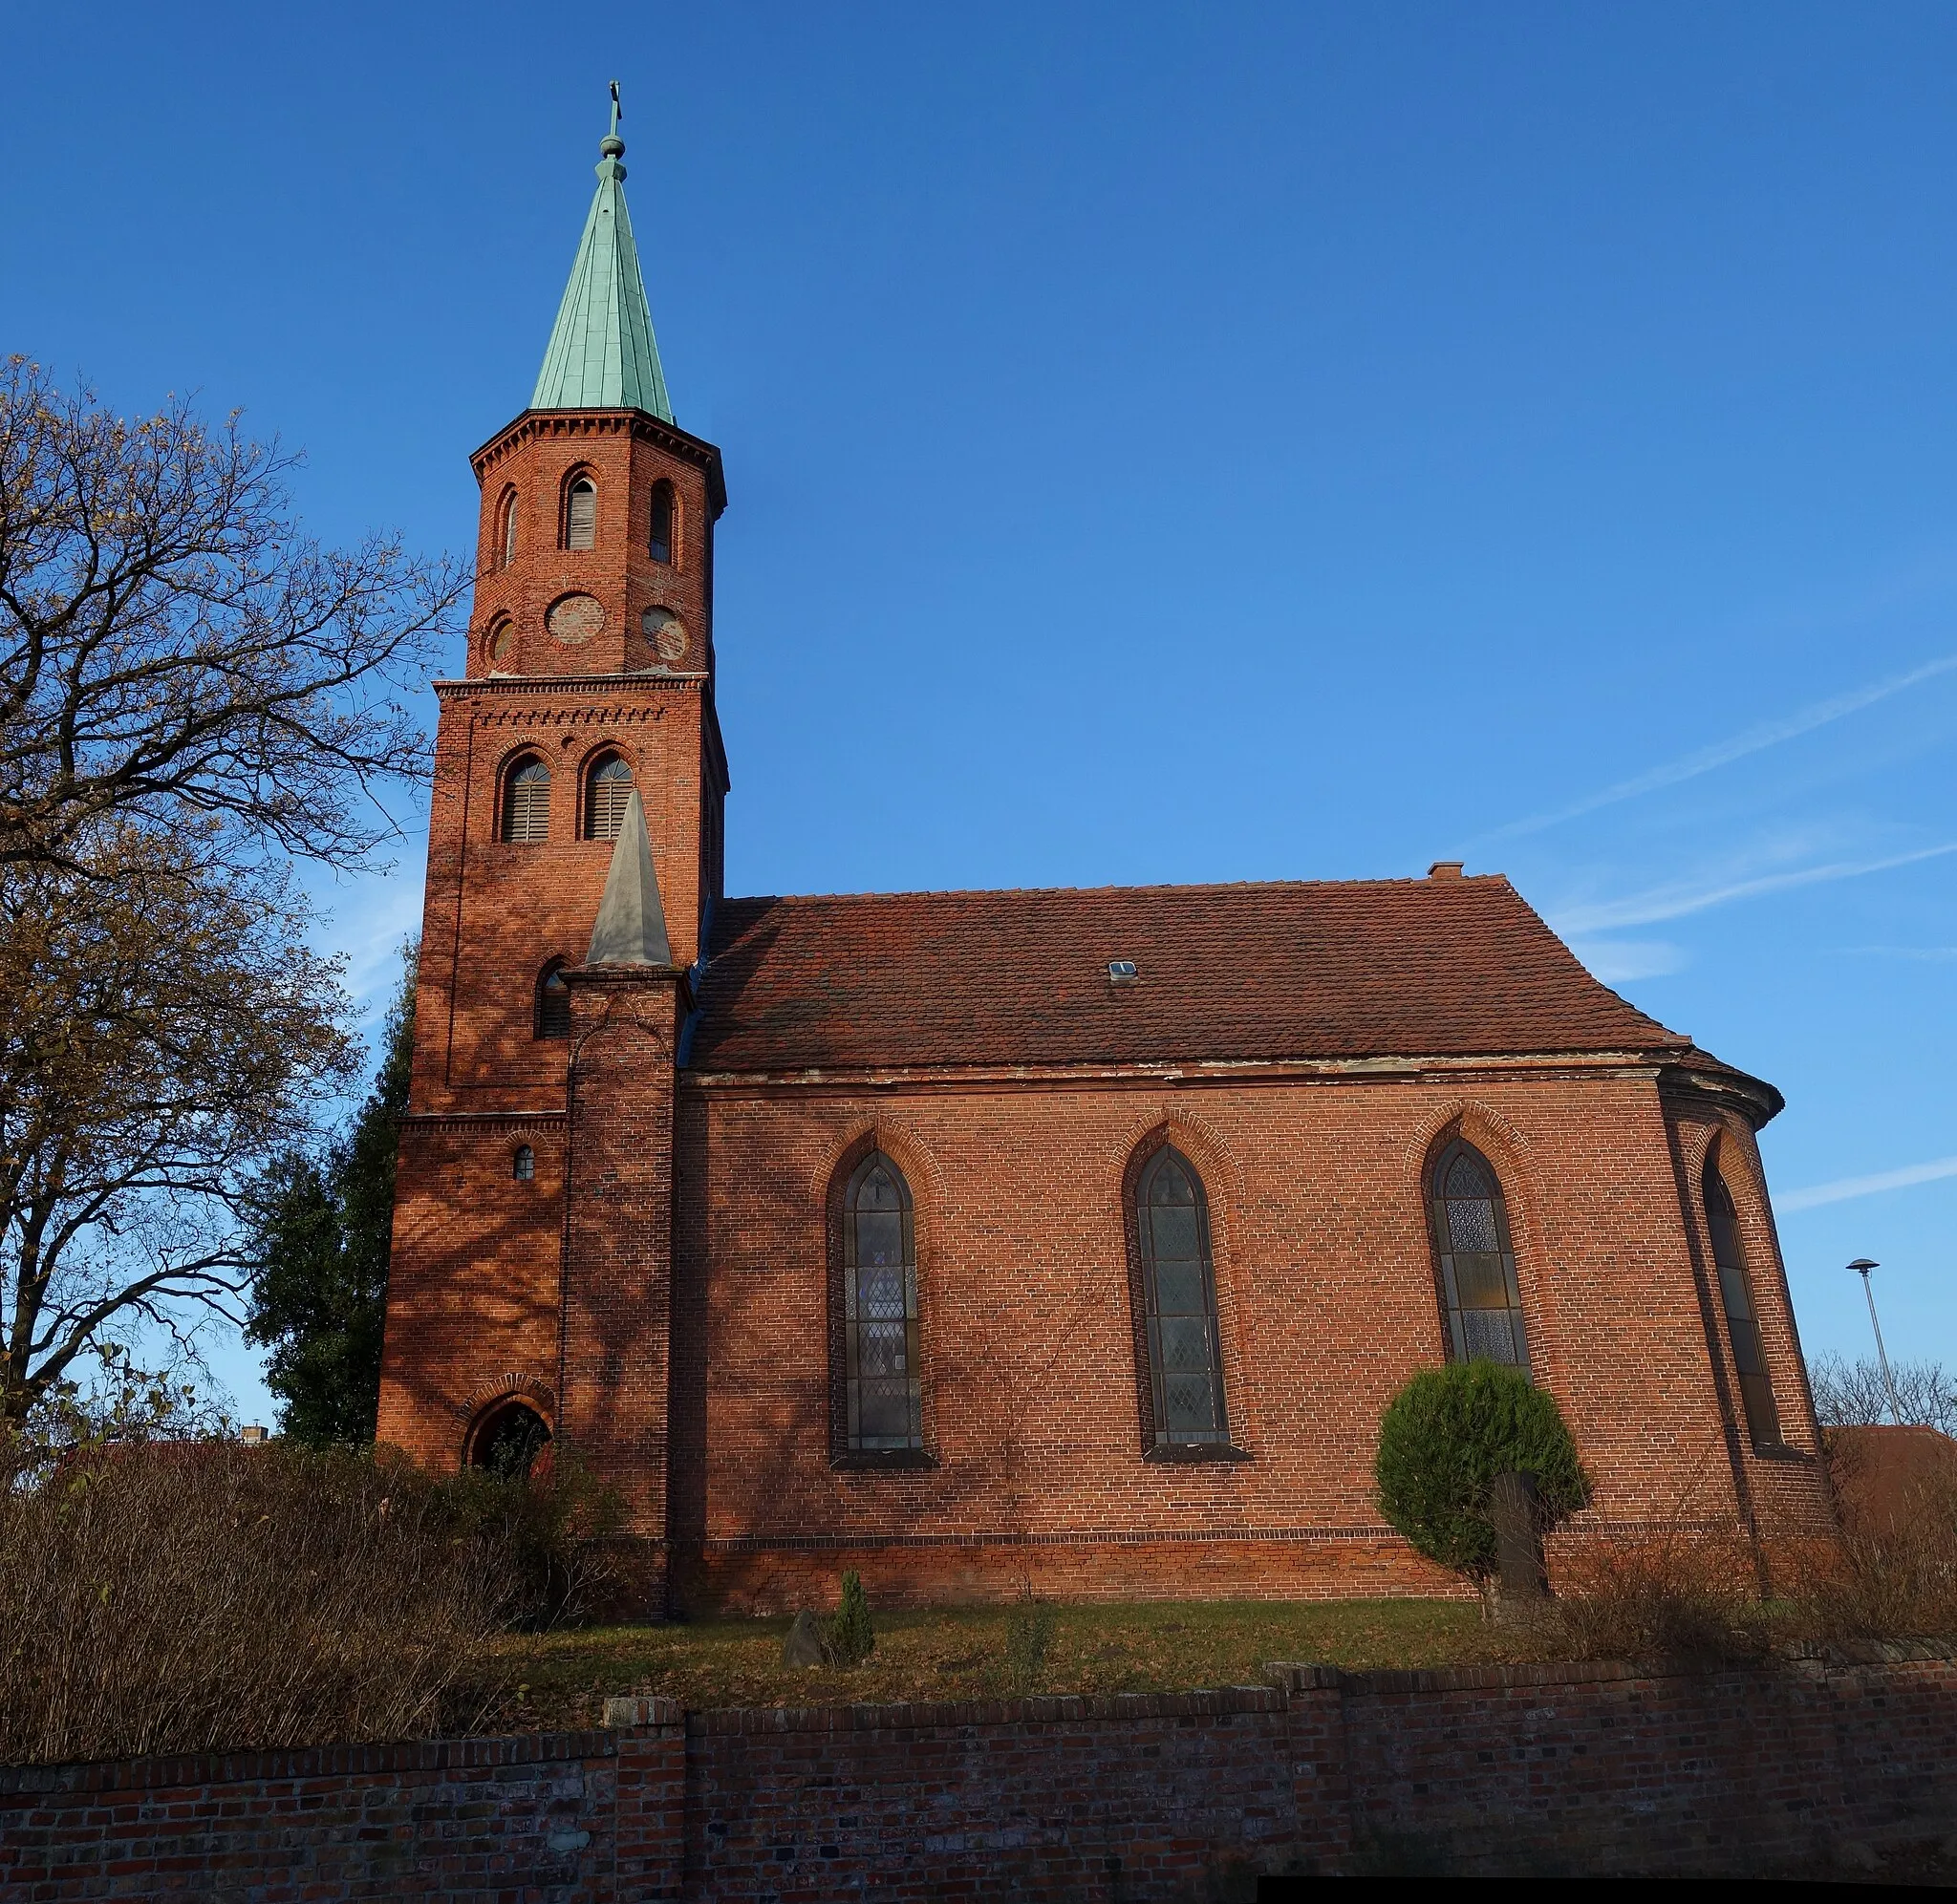 Photo showing: Southern view of church in Parey, Havelaue municipality, Havelland district, Brandenburg state, Germany